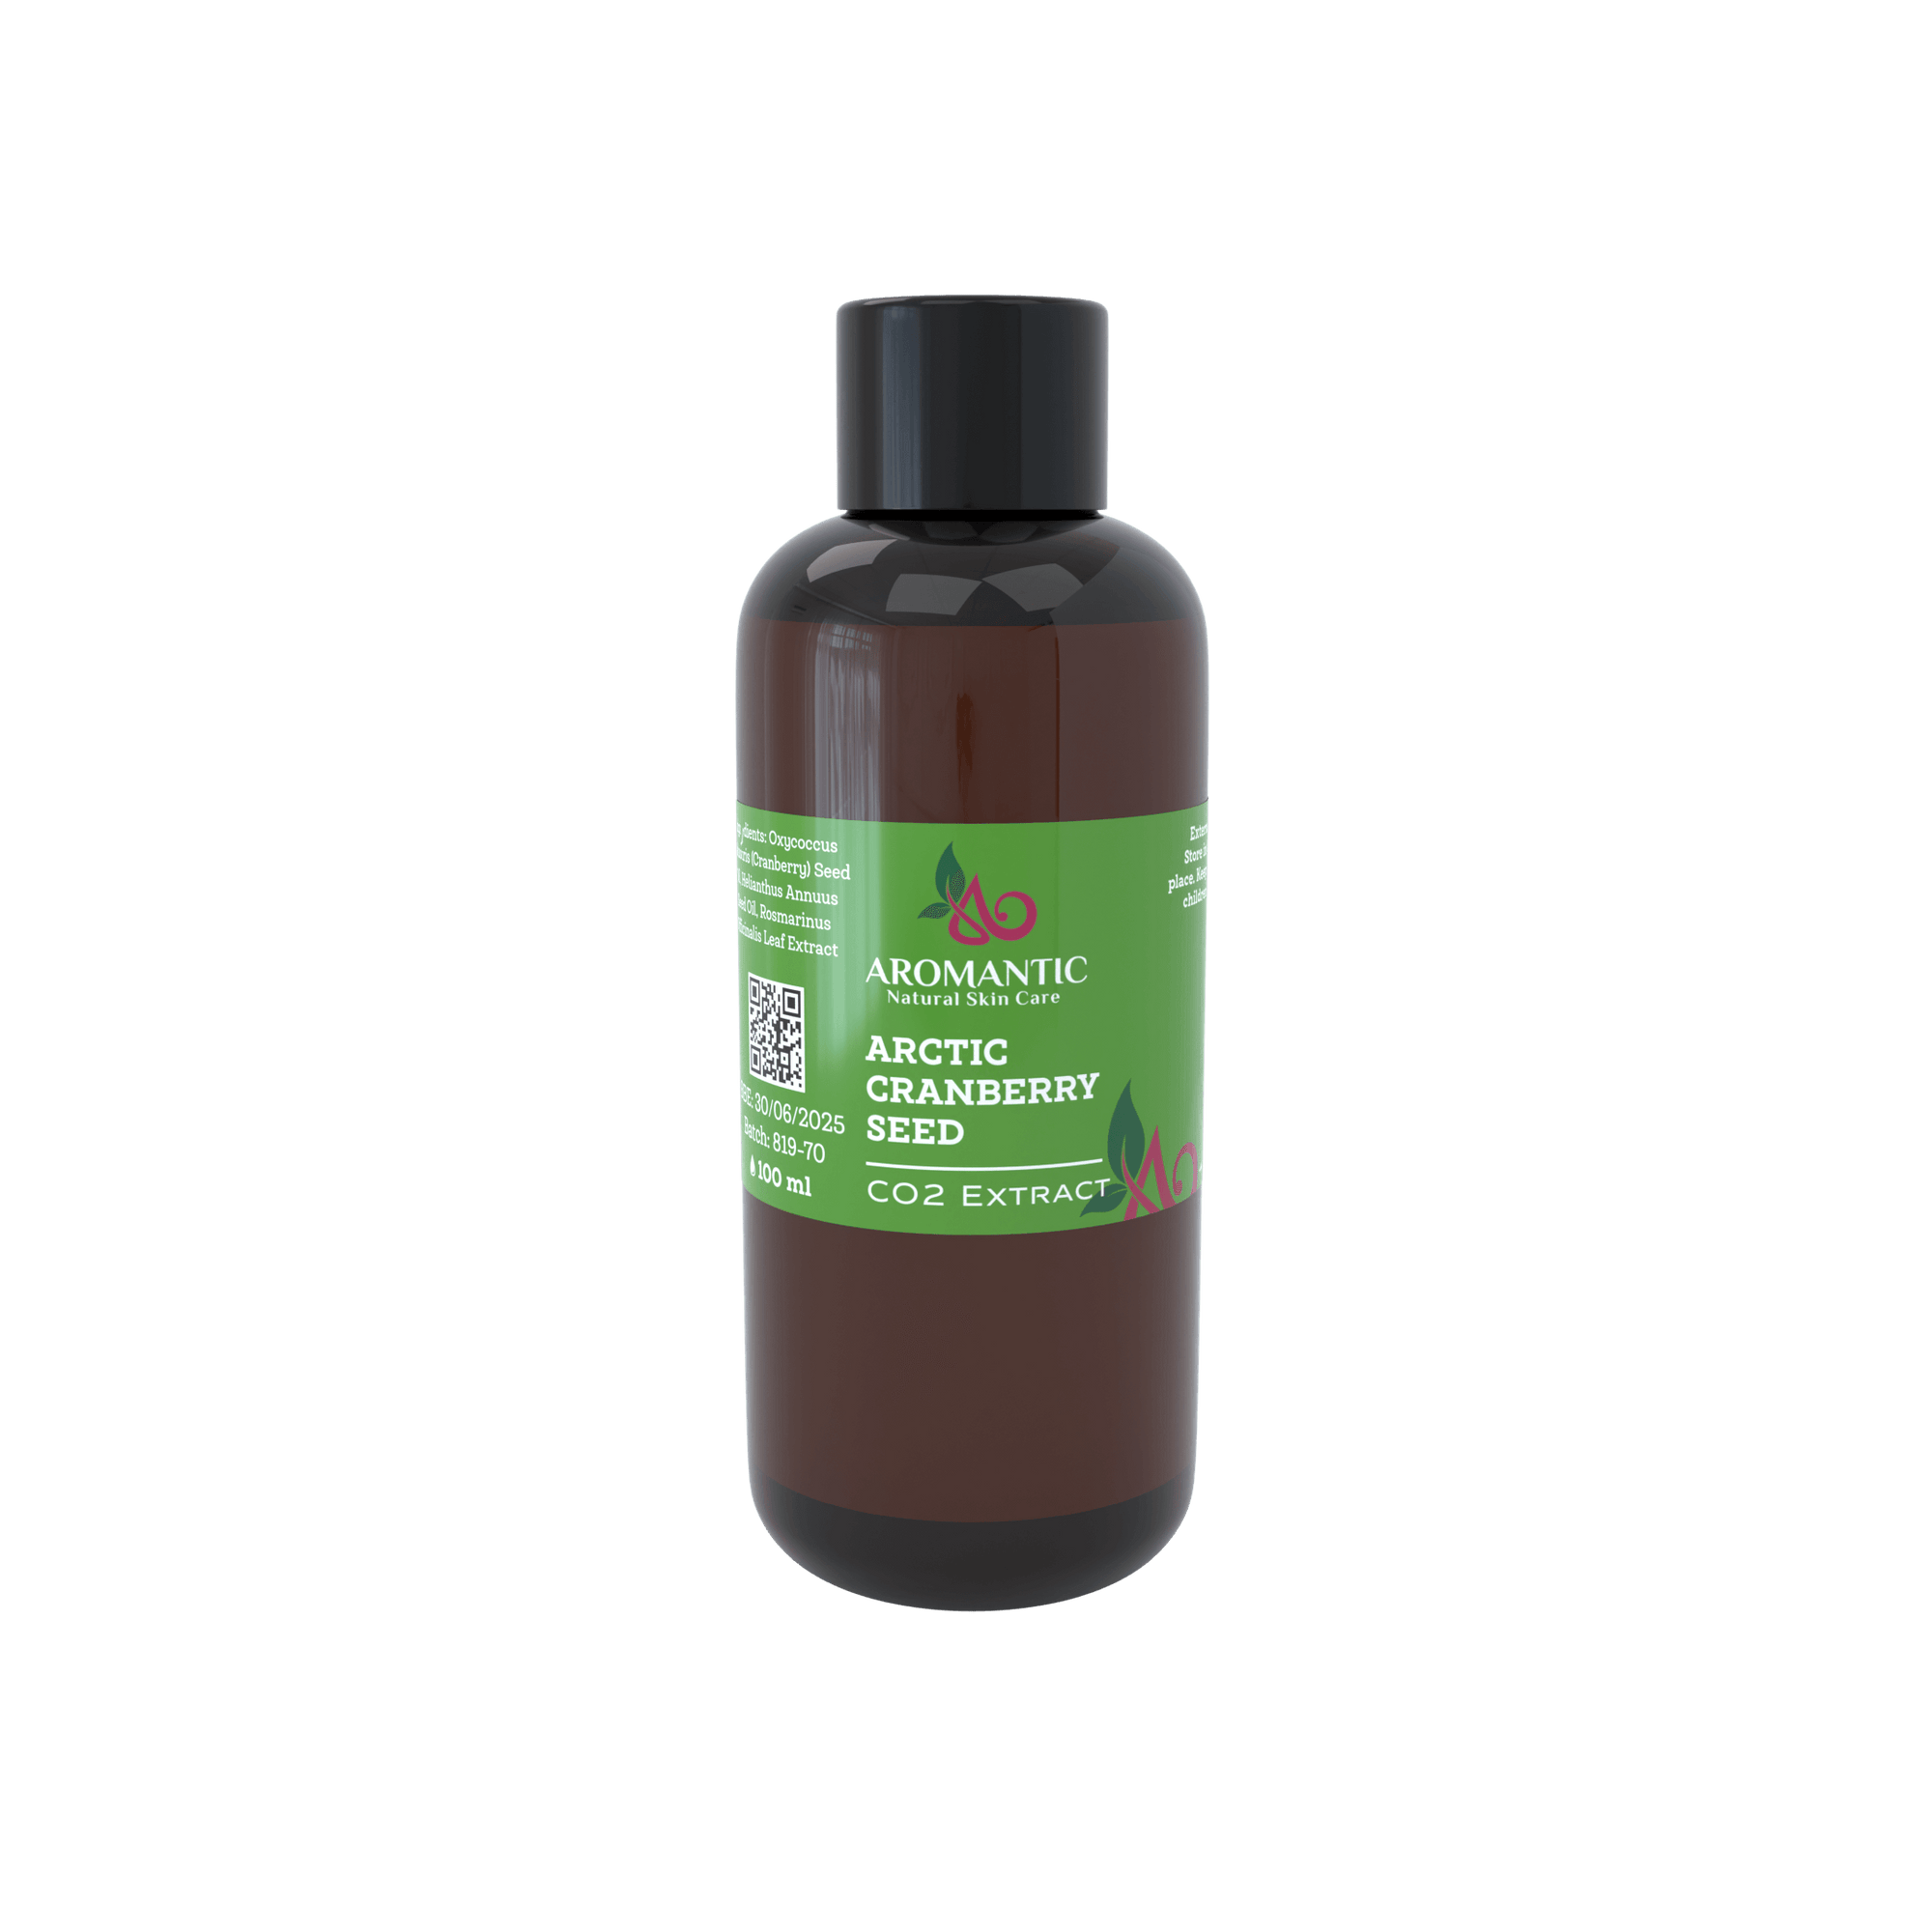 Arctic Cranberry Seed CO2 Extract 100 ml